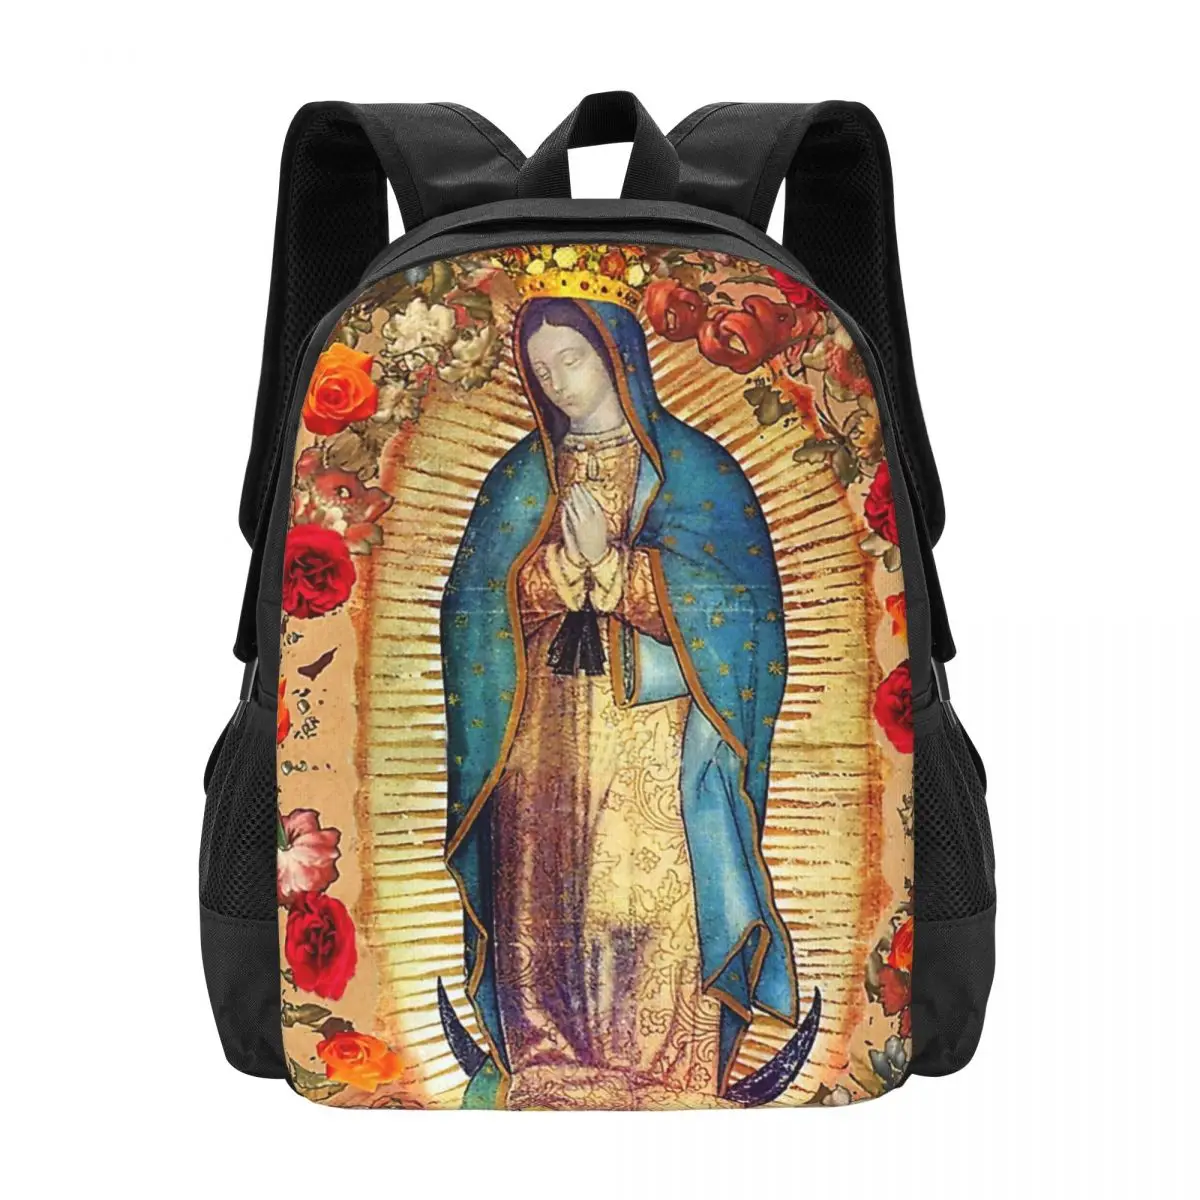 Our Lady Of Guadalupe Virgin Mary Catholic Mexico Poster Backpack for Girls Boys Travel RucksackBackpacks for Teenage school bag